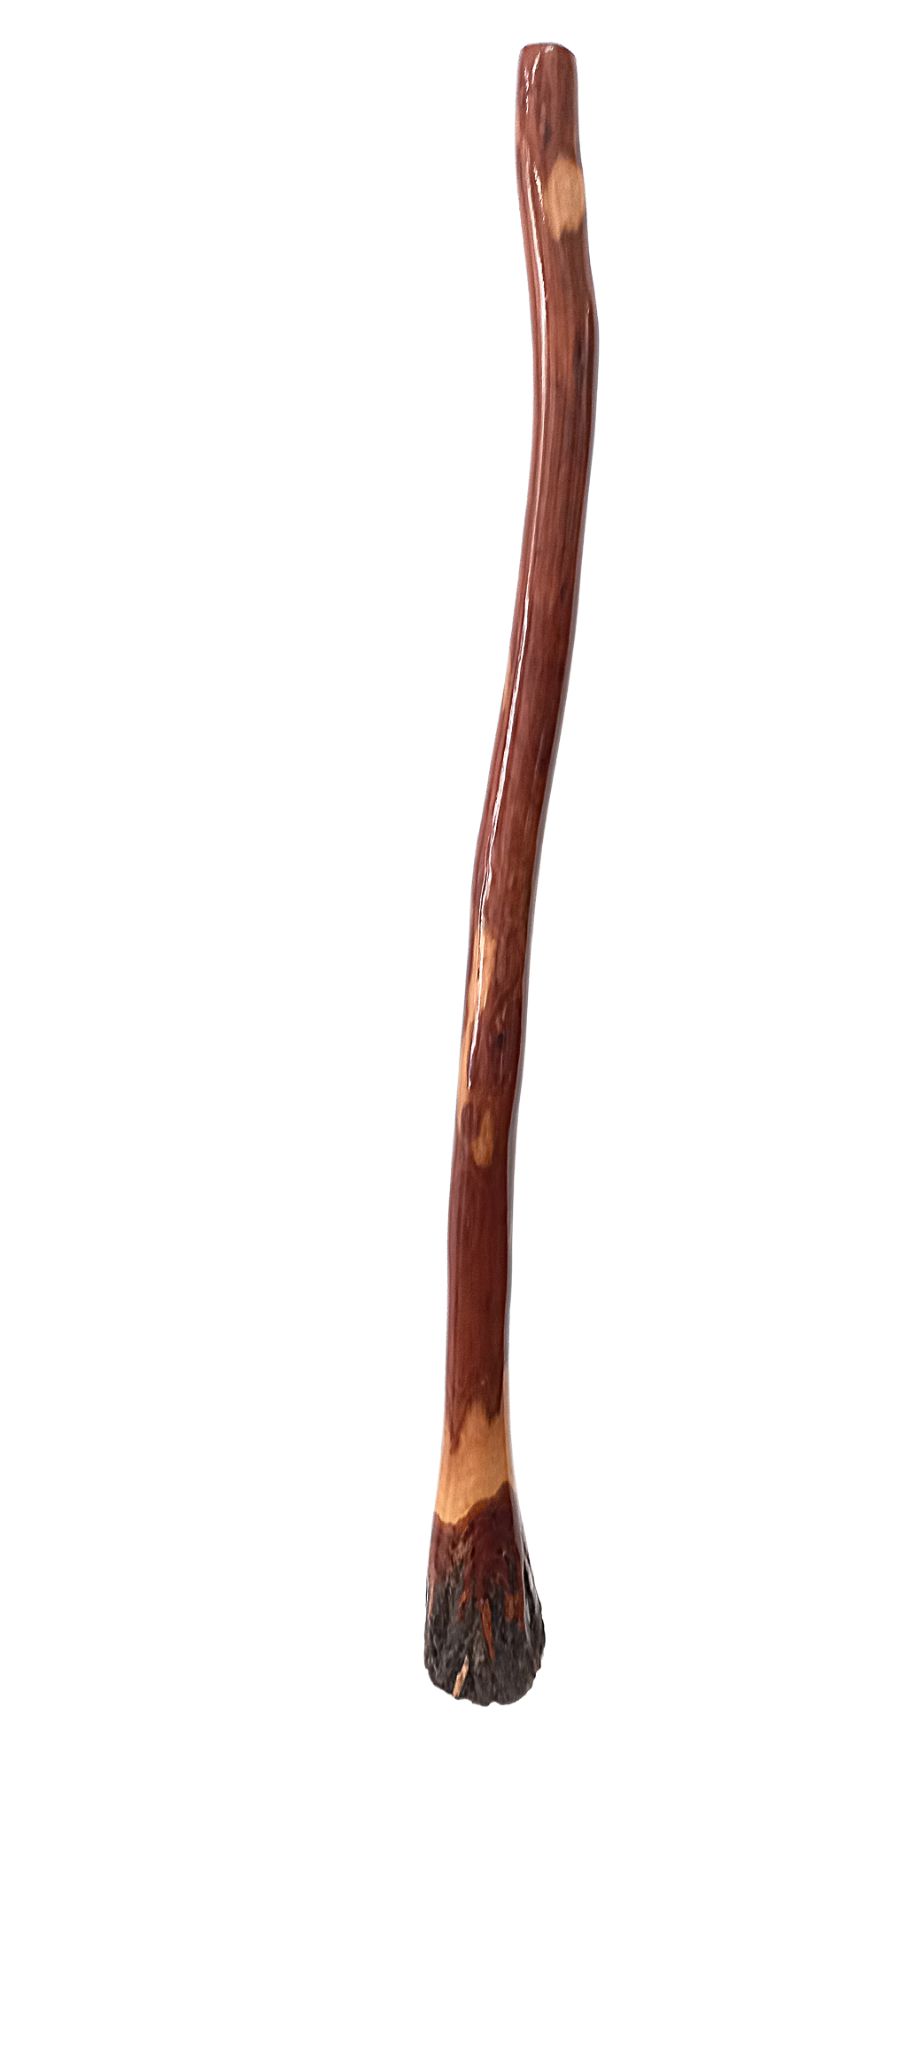 Stringy-bark 142cm hand painted didgeridoo by Karl Hardy no 34